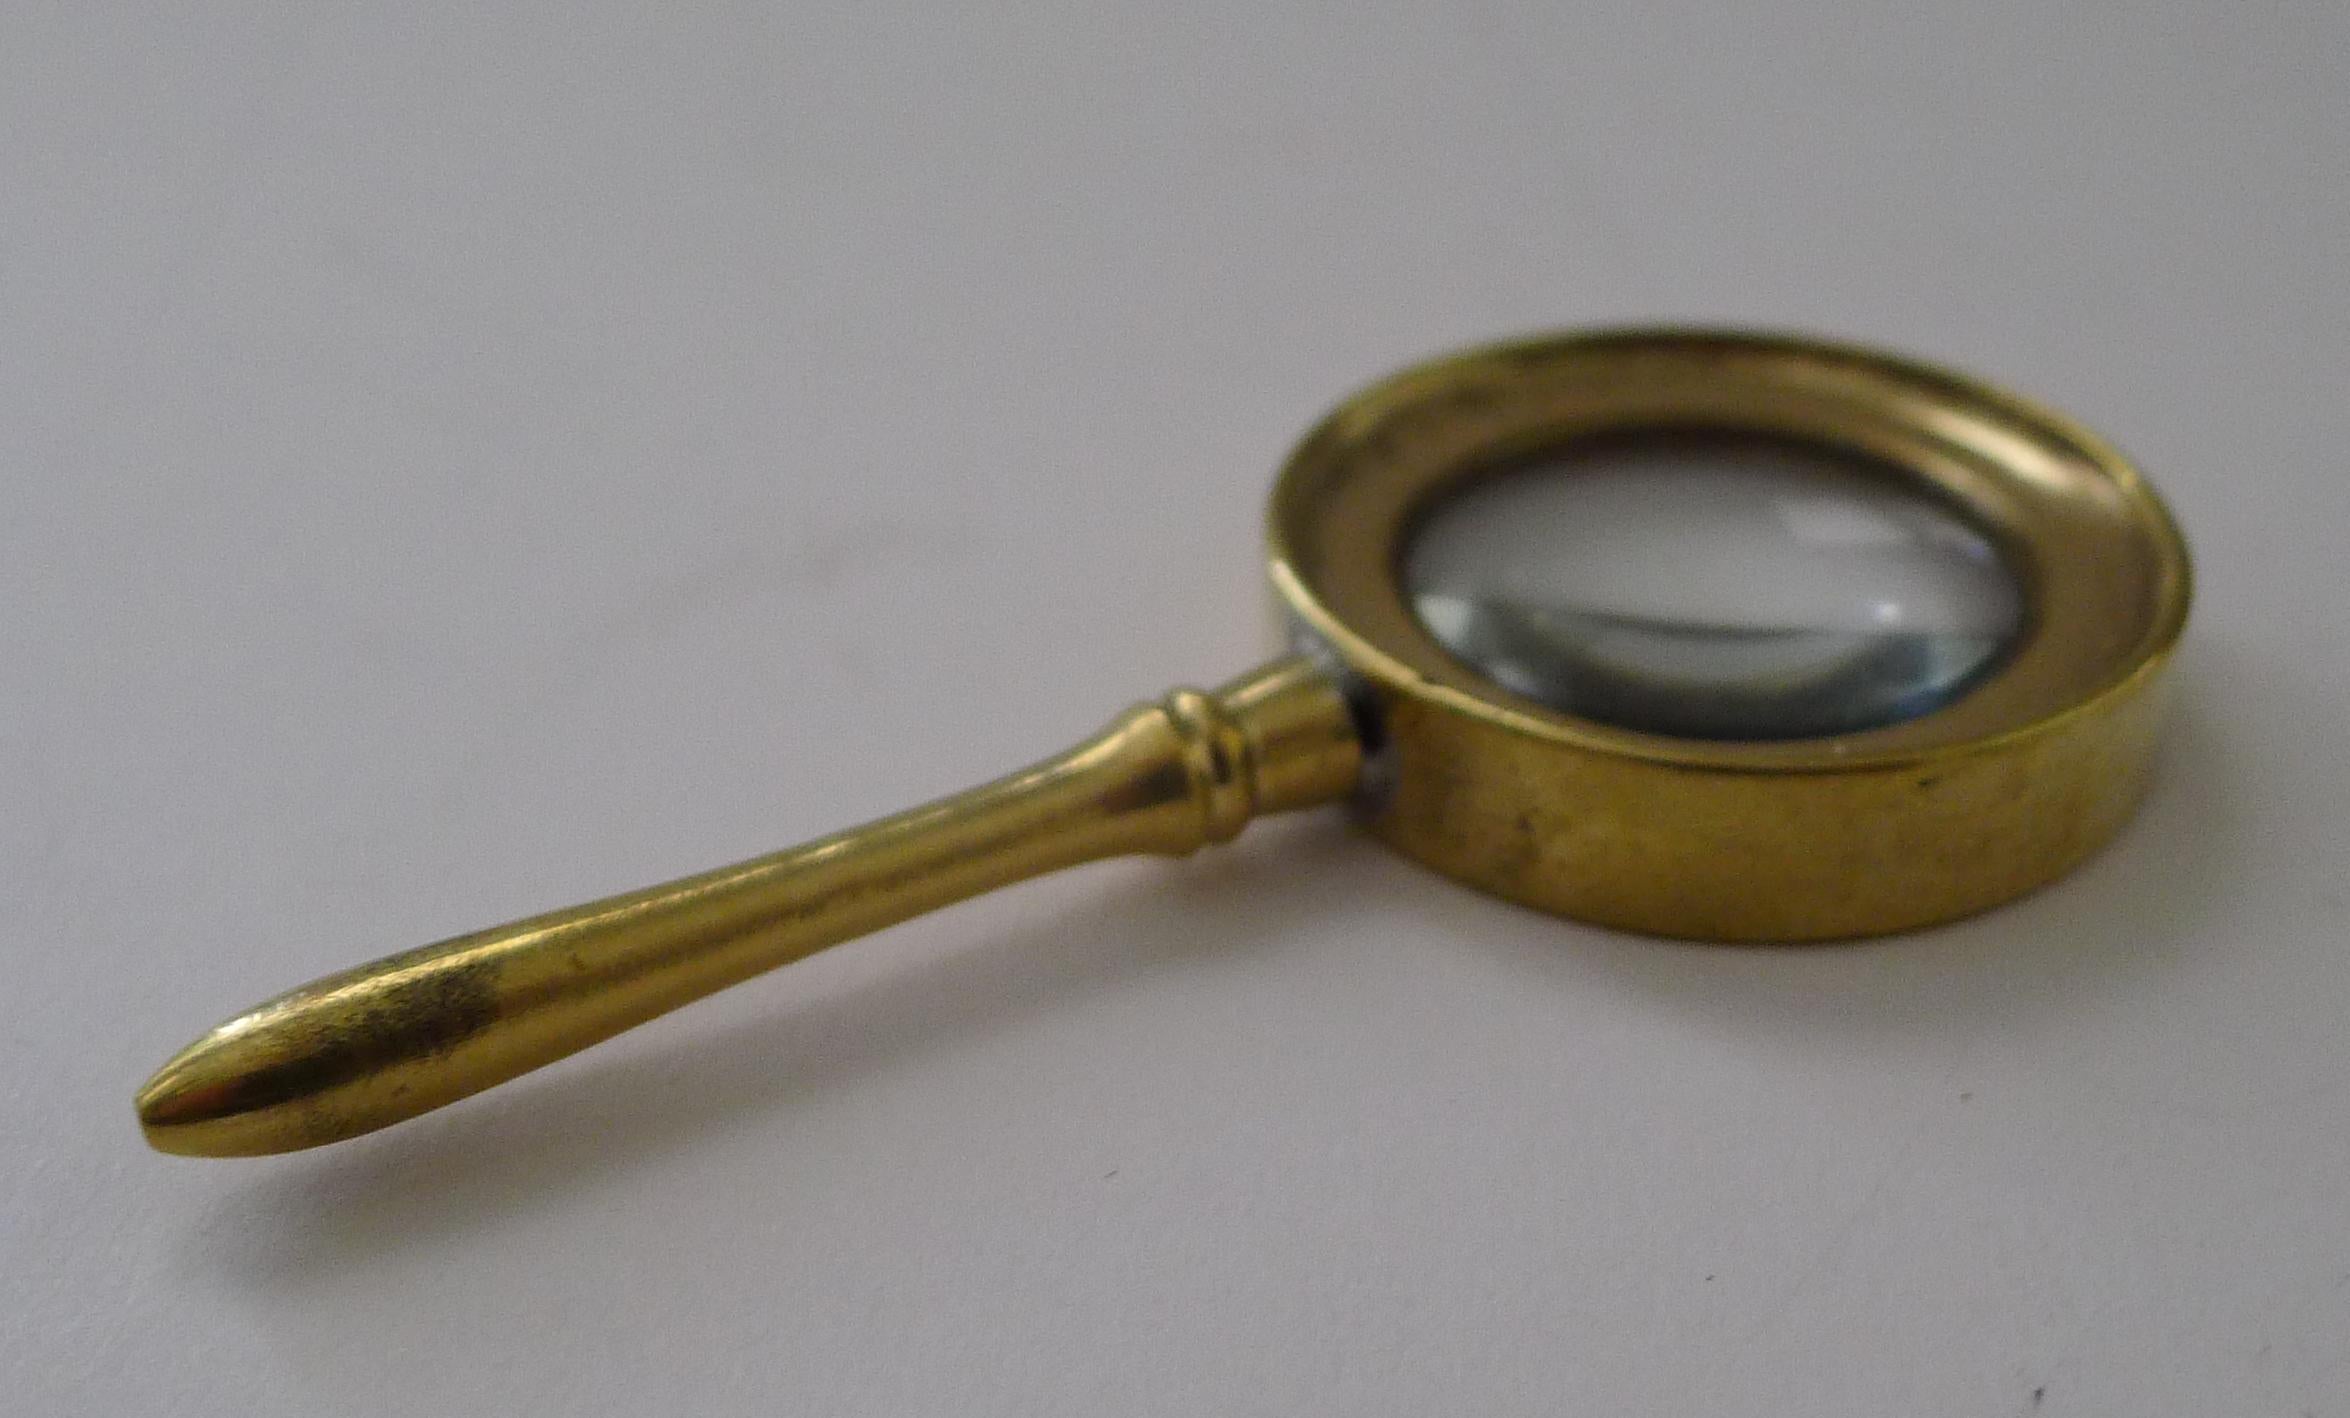 A lovely little magnifying glass made from solid brass with a handle; the perfect size to pop in the pocket or bag.

Dating to c.1910, Edwardian in era, the magnifier works well and in excellent condition.

3